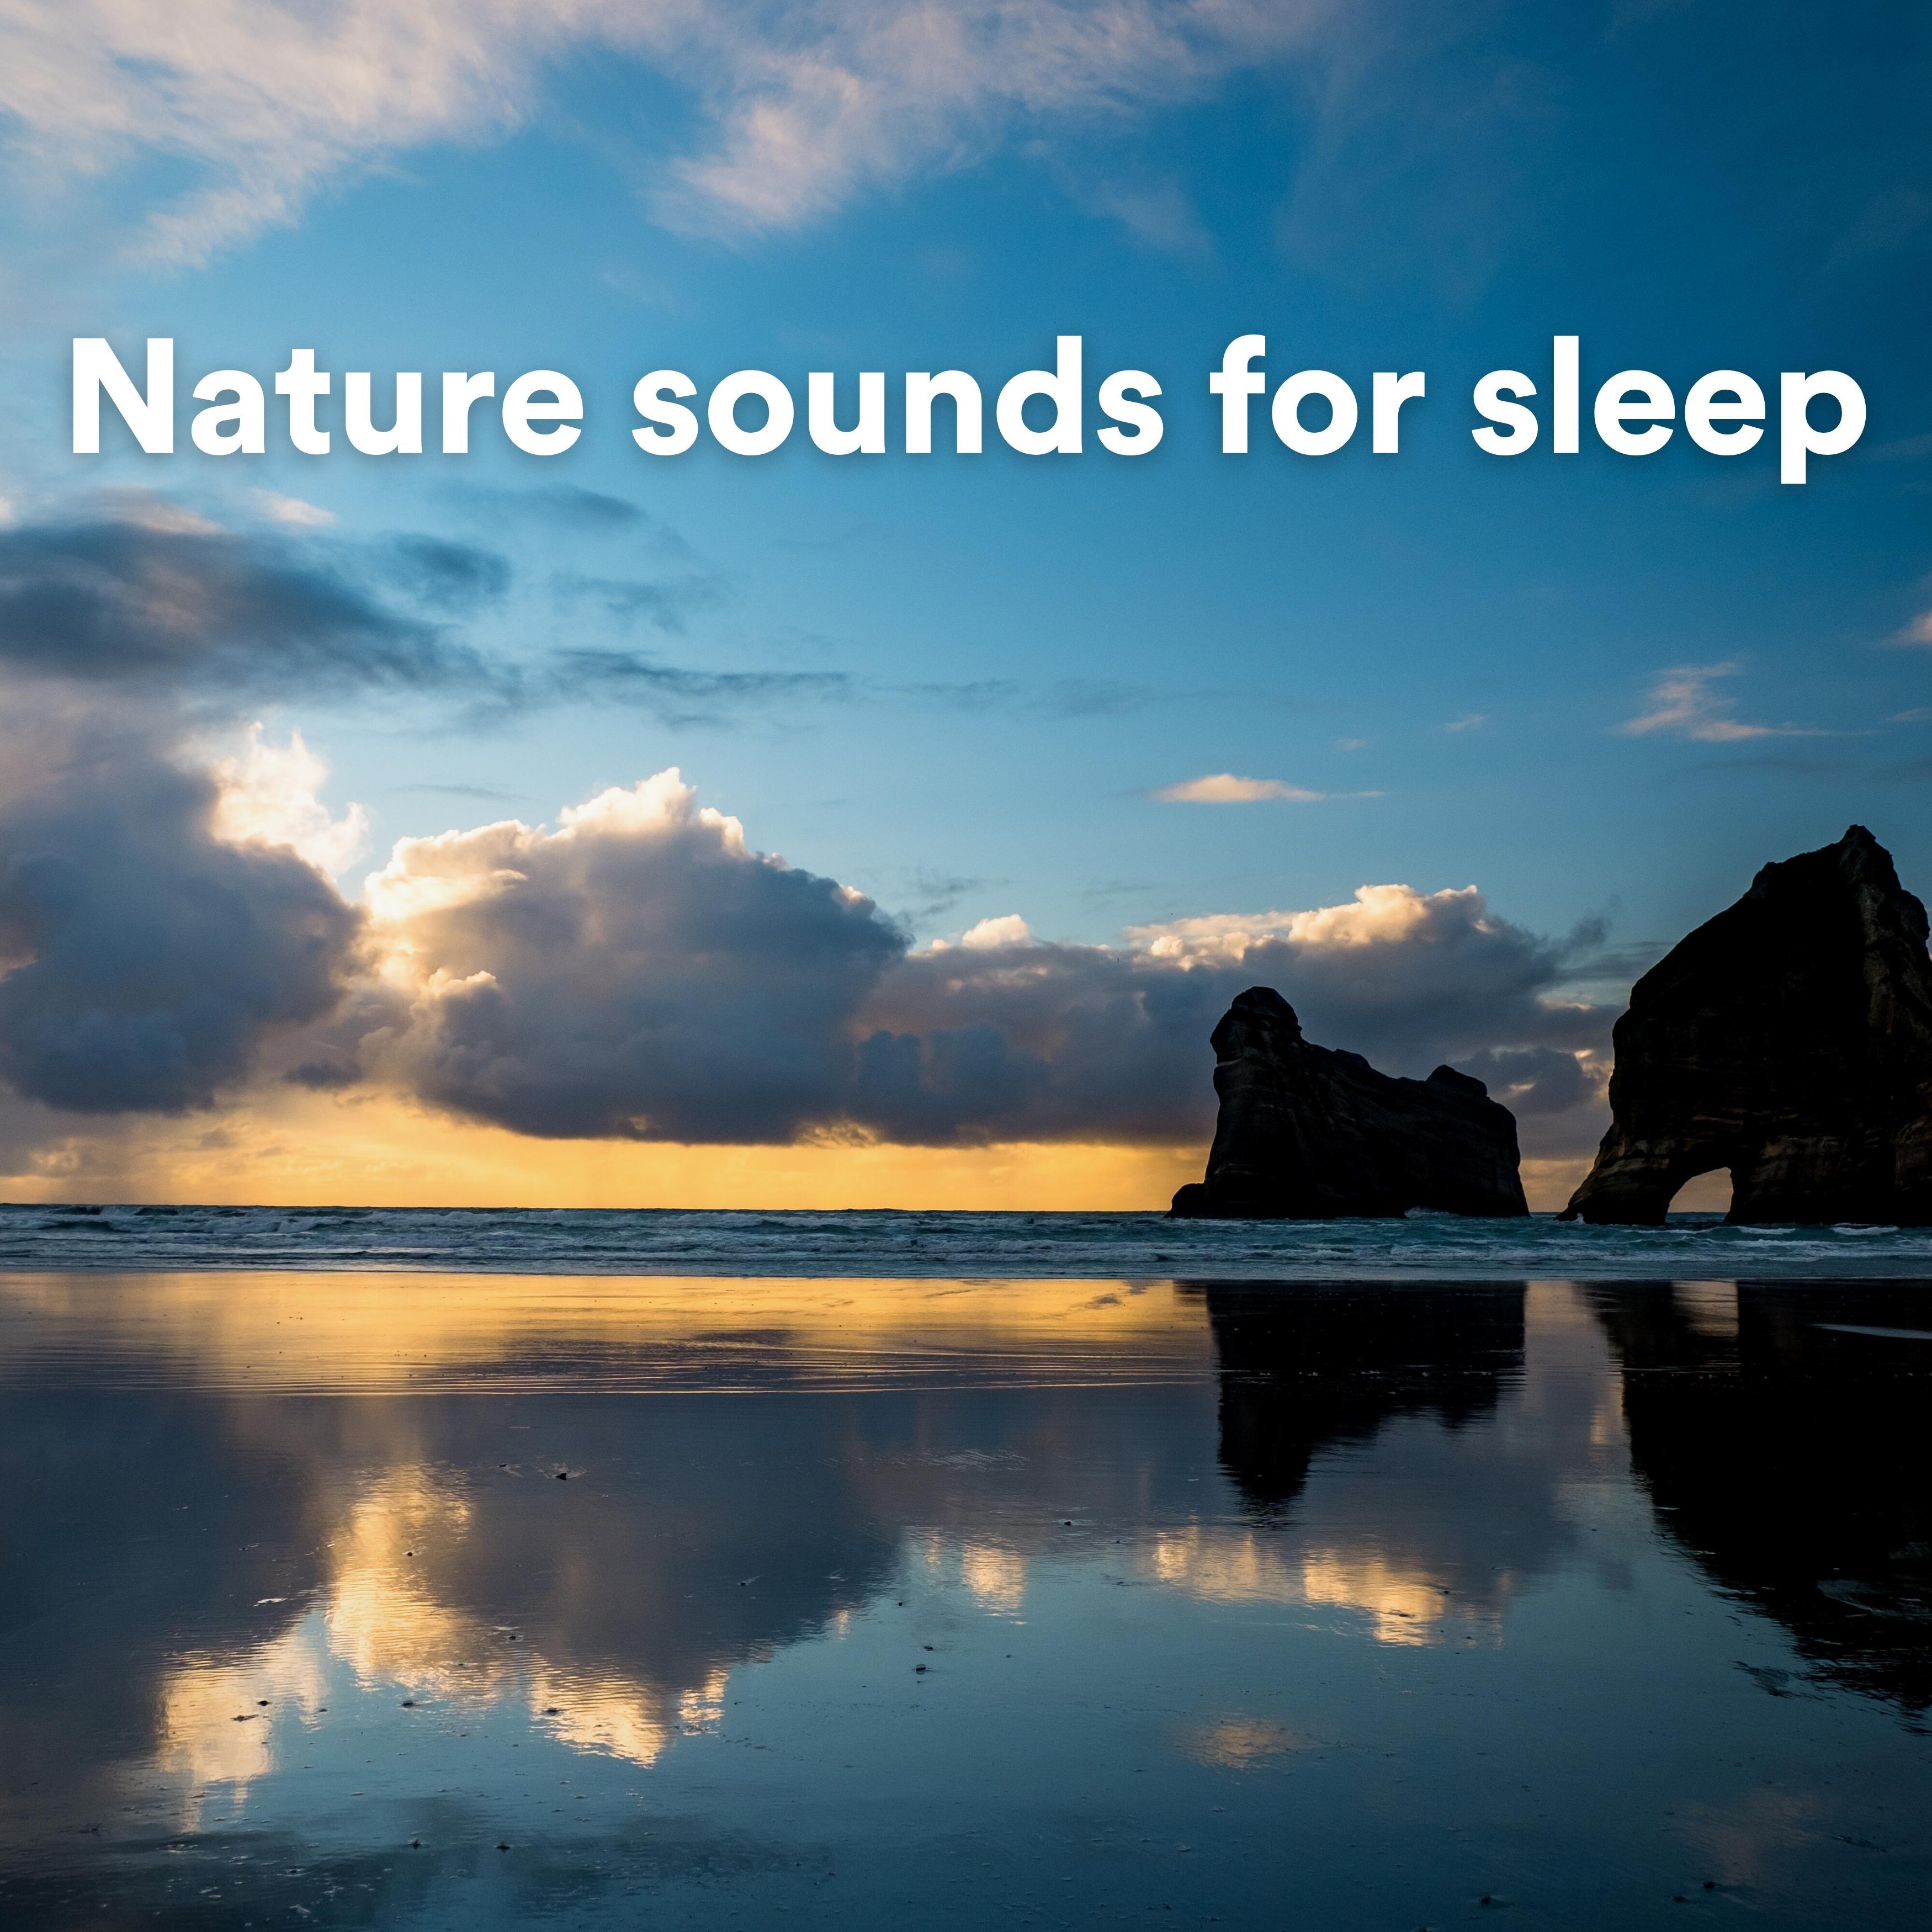 Nature Sound Series - Nature sounds for sleep, Pt. 13